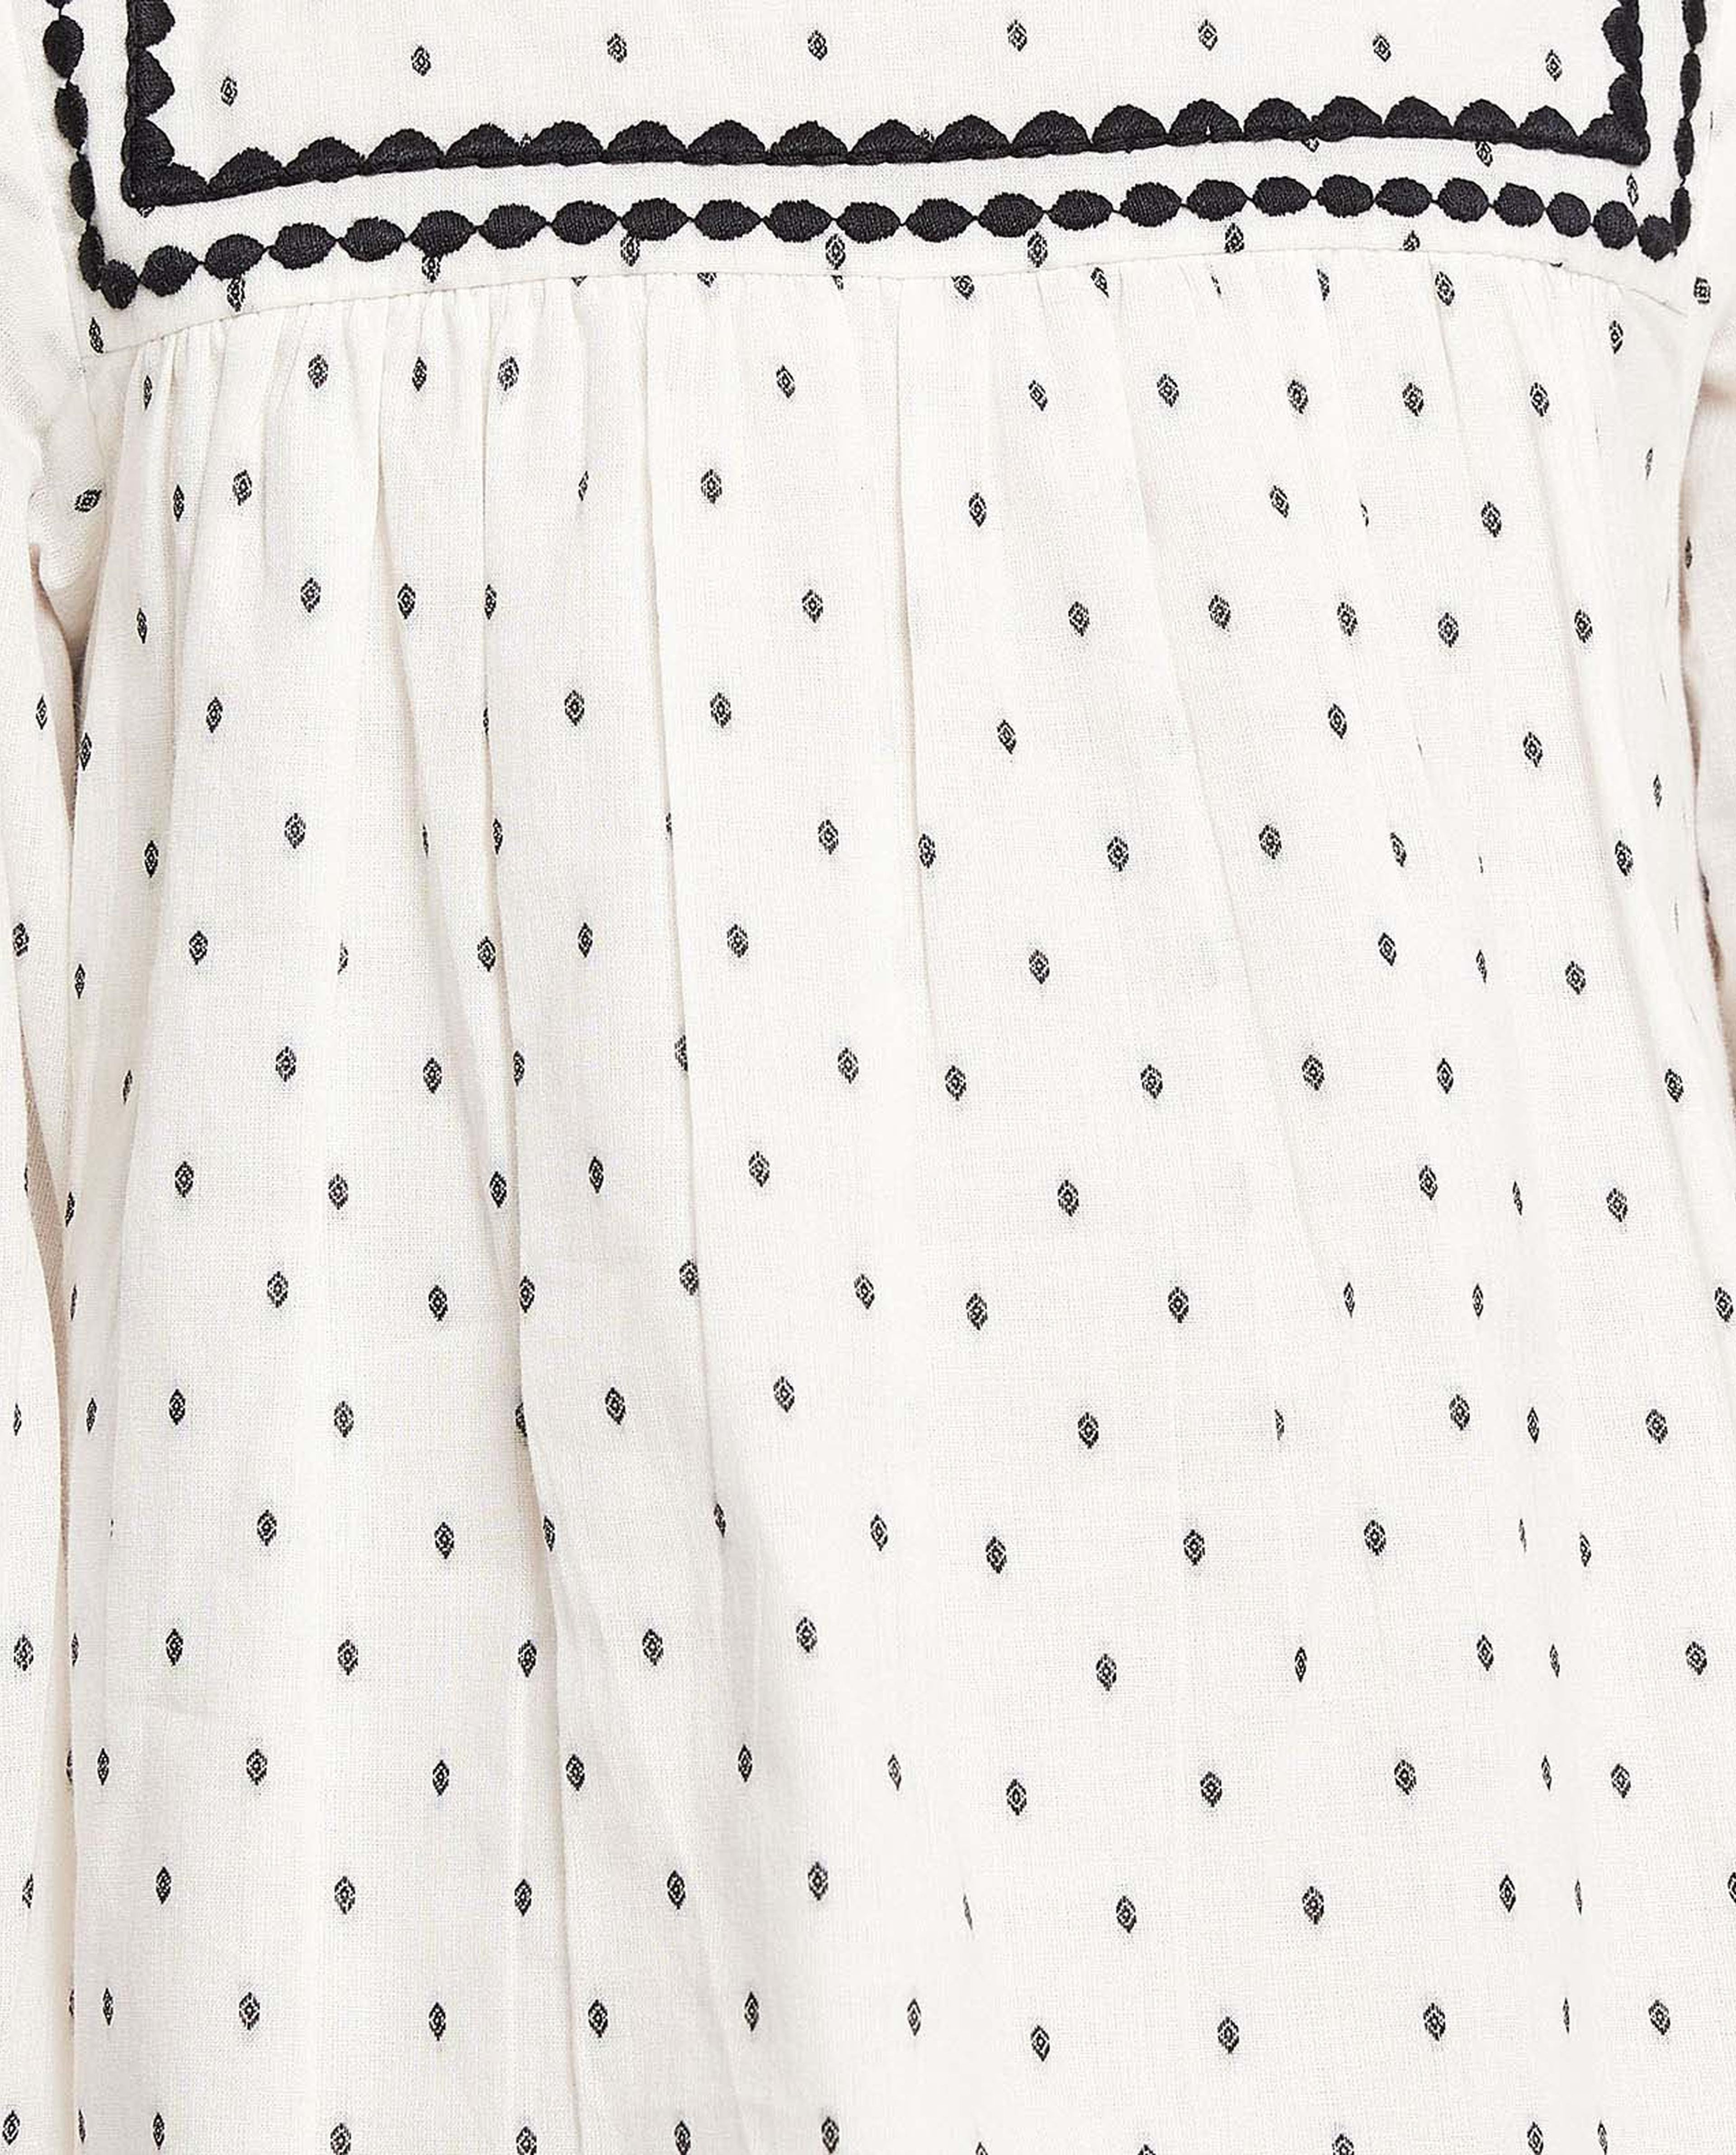 Polka Dots Top with Crew Neck and Long Sleeves